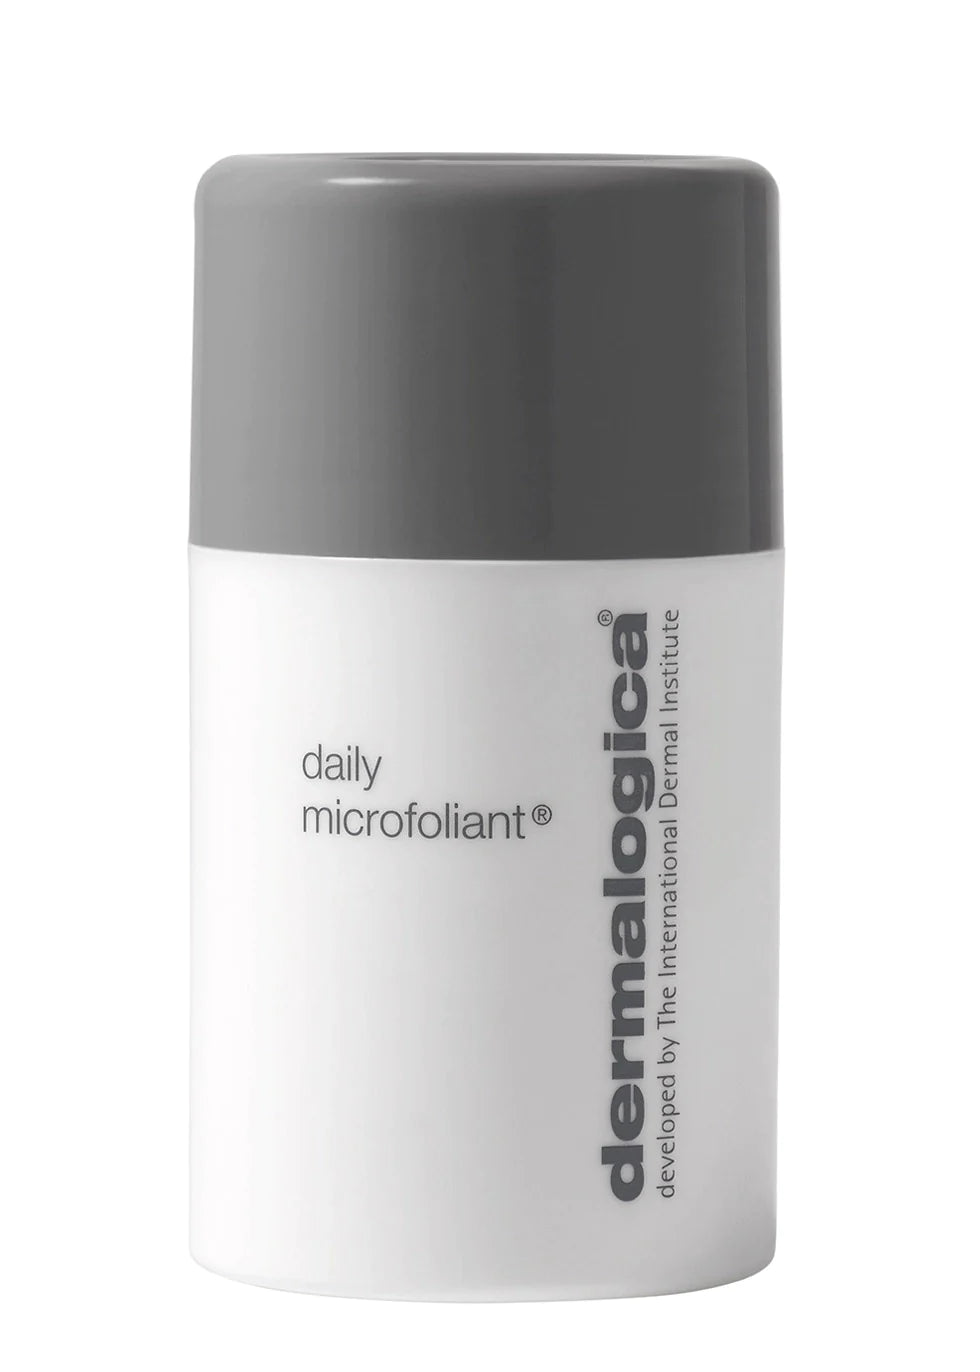 FREE Daily Microfoliant Travel Size 13g (GWP6) €19.00 (8484035395914)